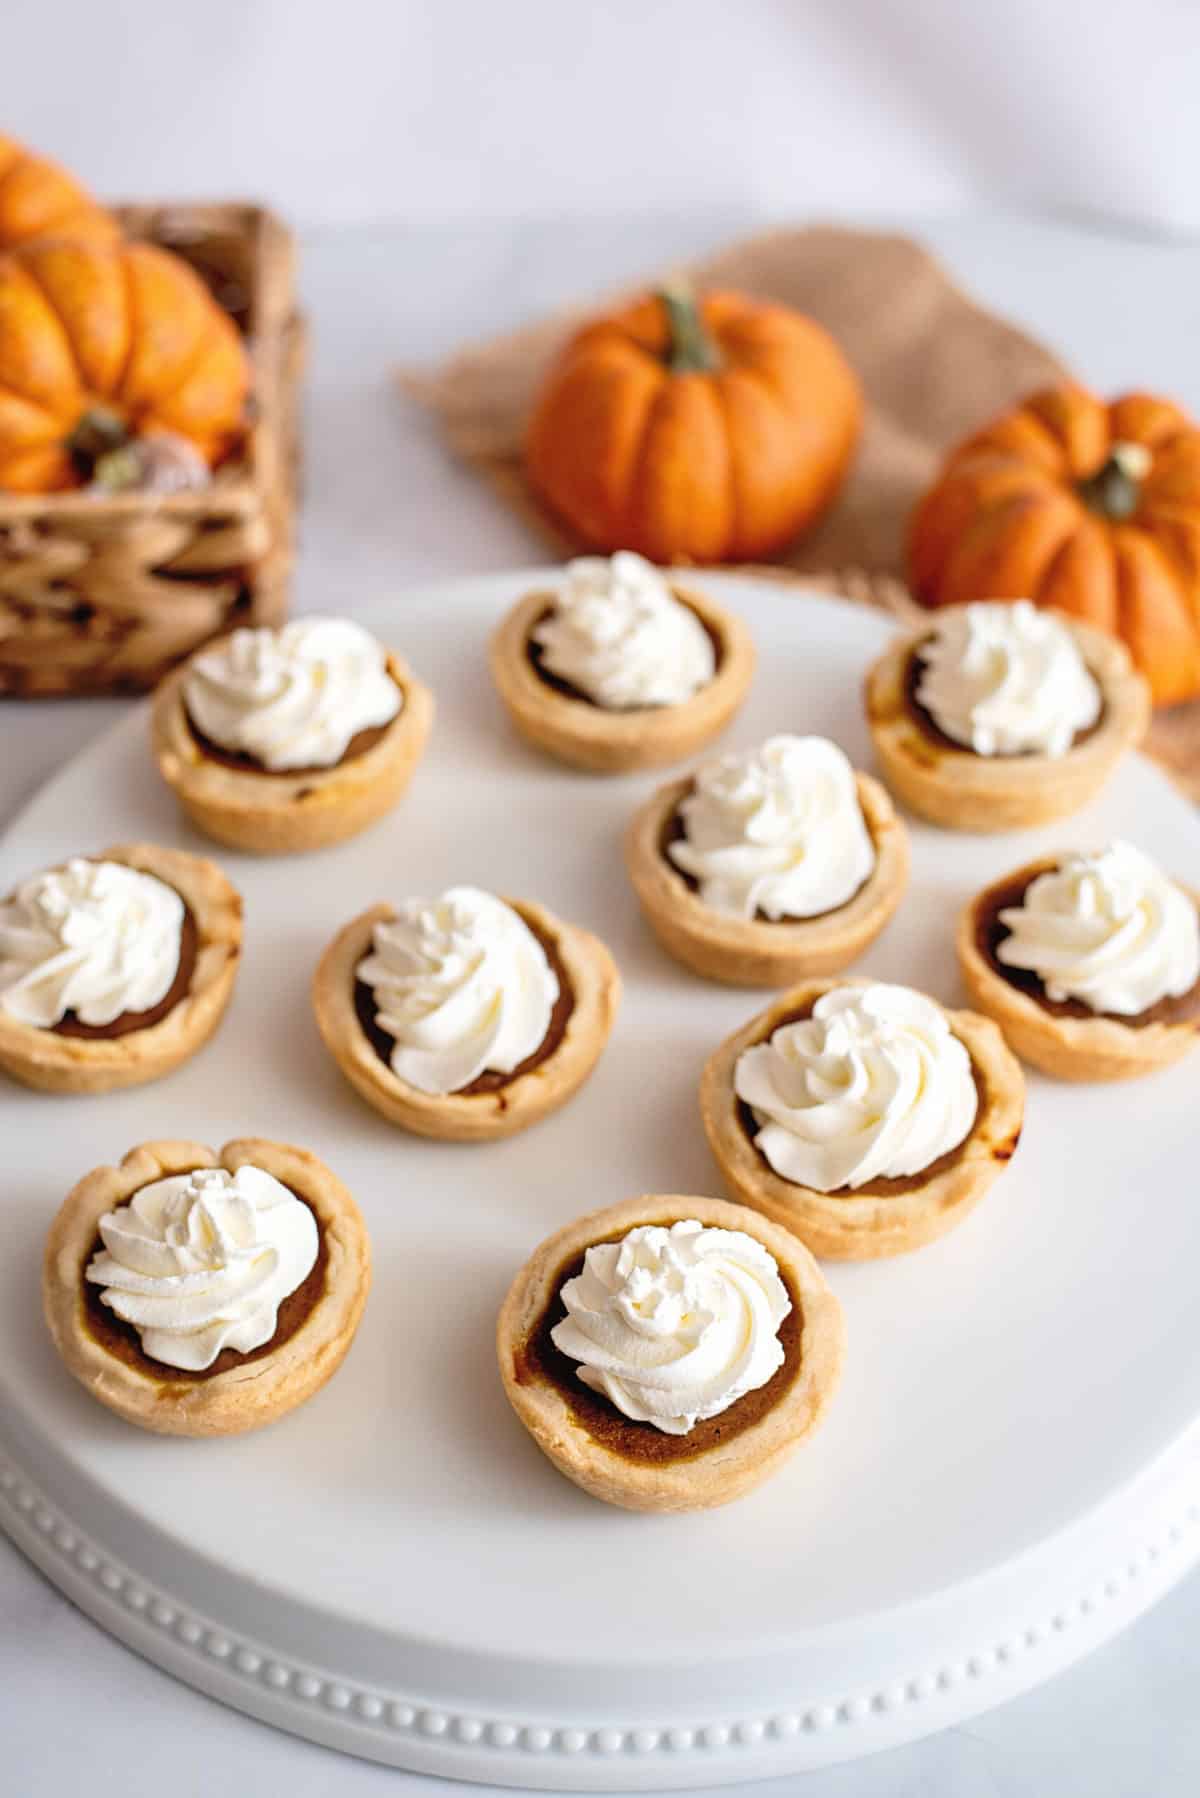 Serving plate filled with mini pumpkin pies.